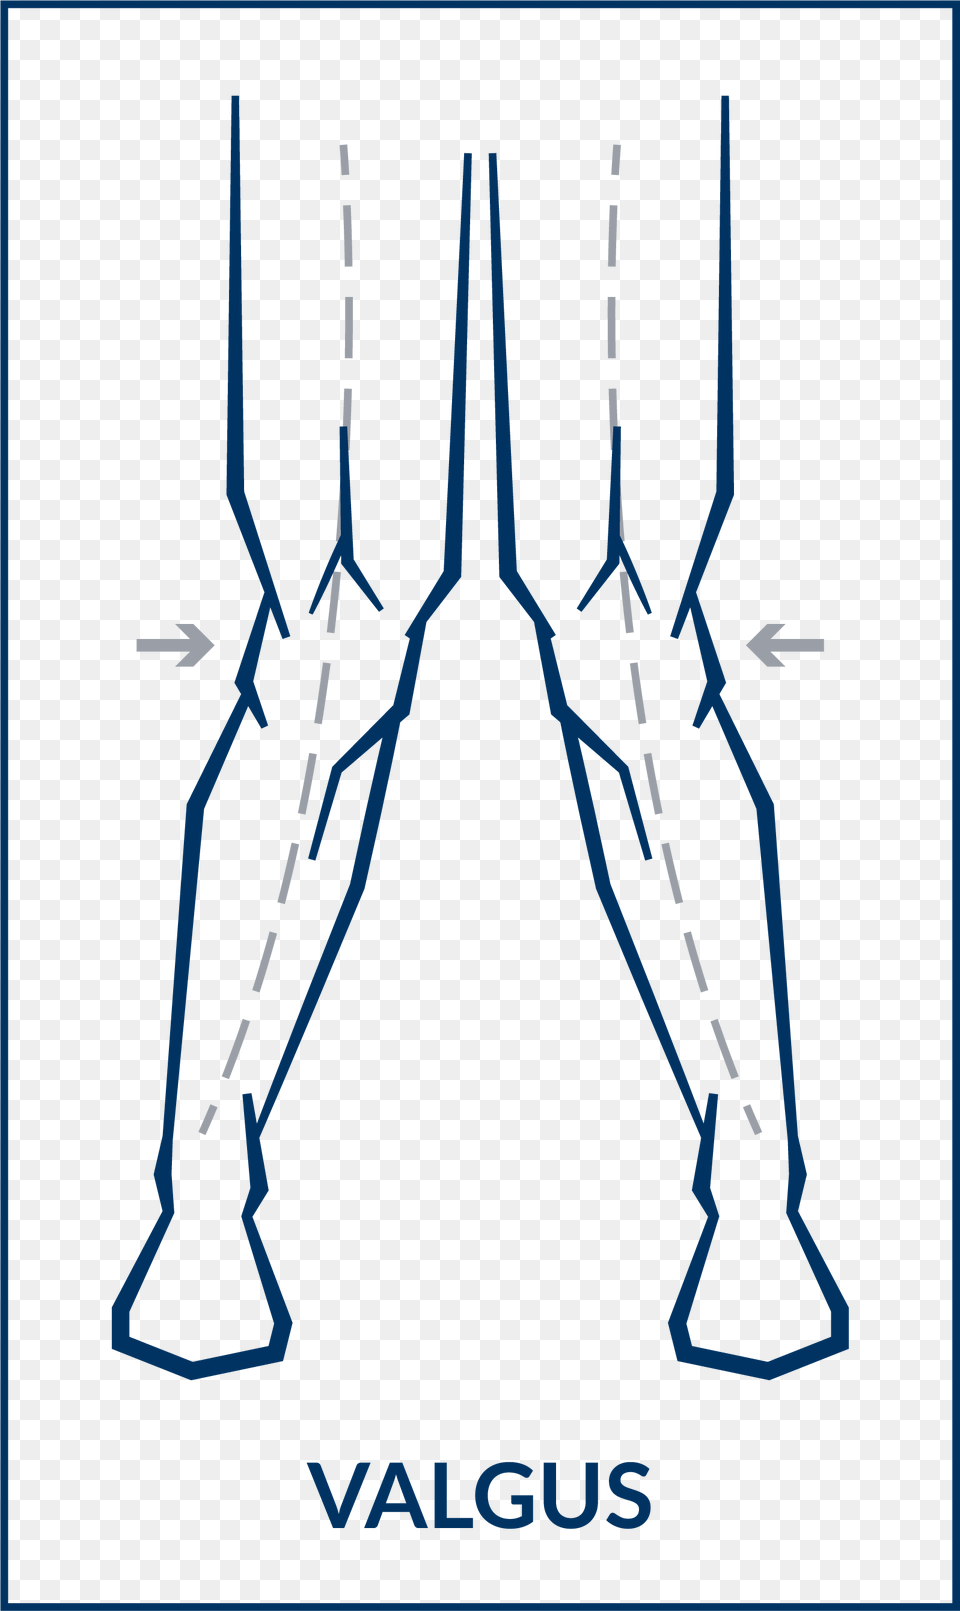 Use The Allen Wrench Provided For Minor Varusvalgus Art, Chart, Plot Png Image